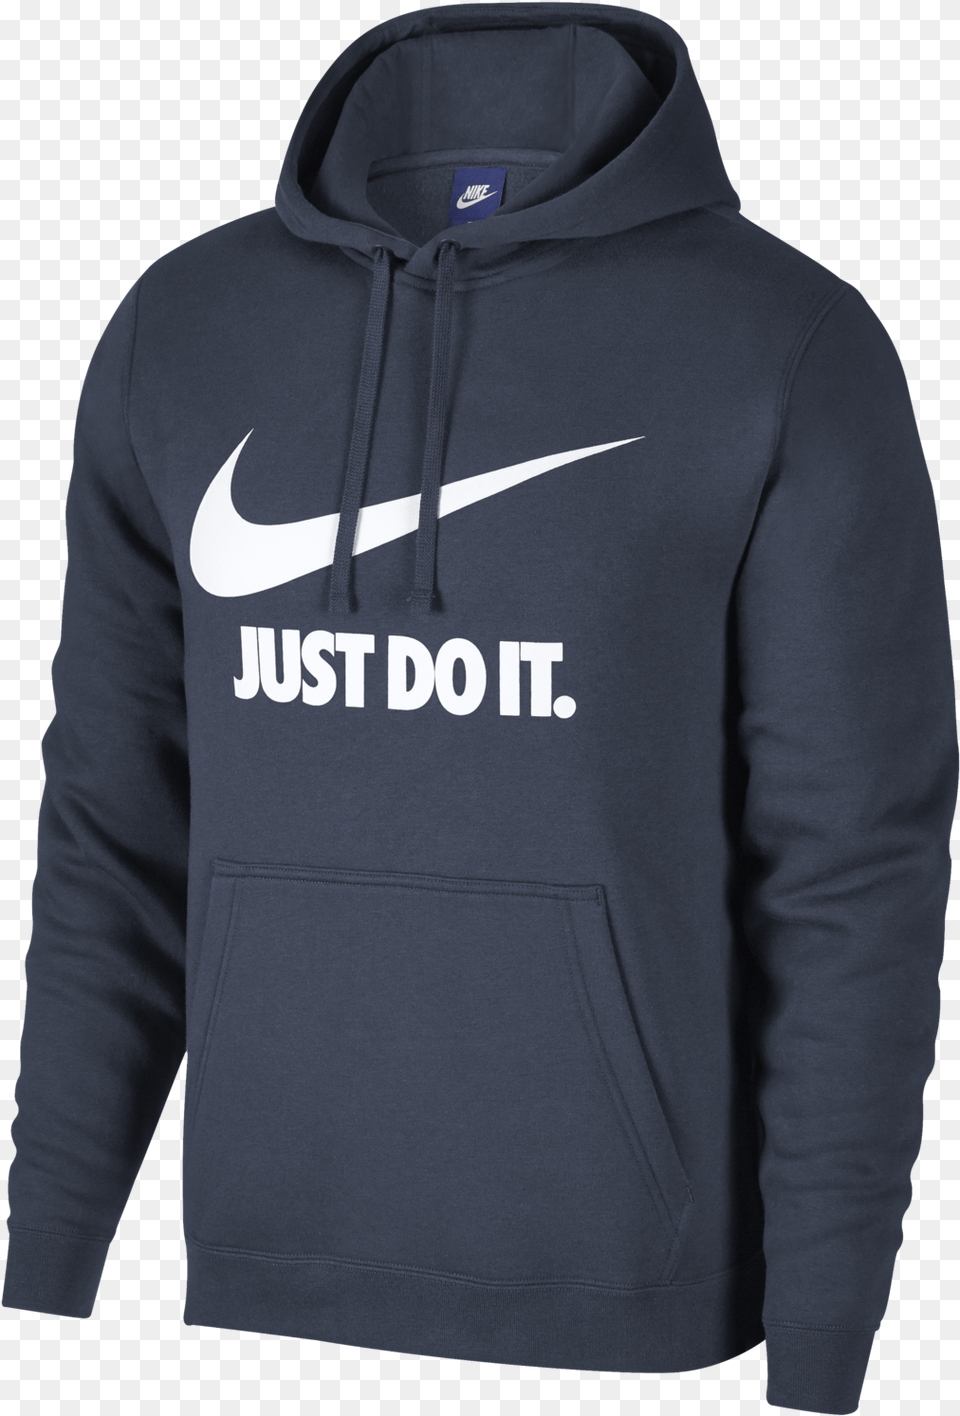 Nike Hoodies For Sale In South Africa, Clothing, Hoodie, Knitwear, Sweater Free Png Download